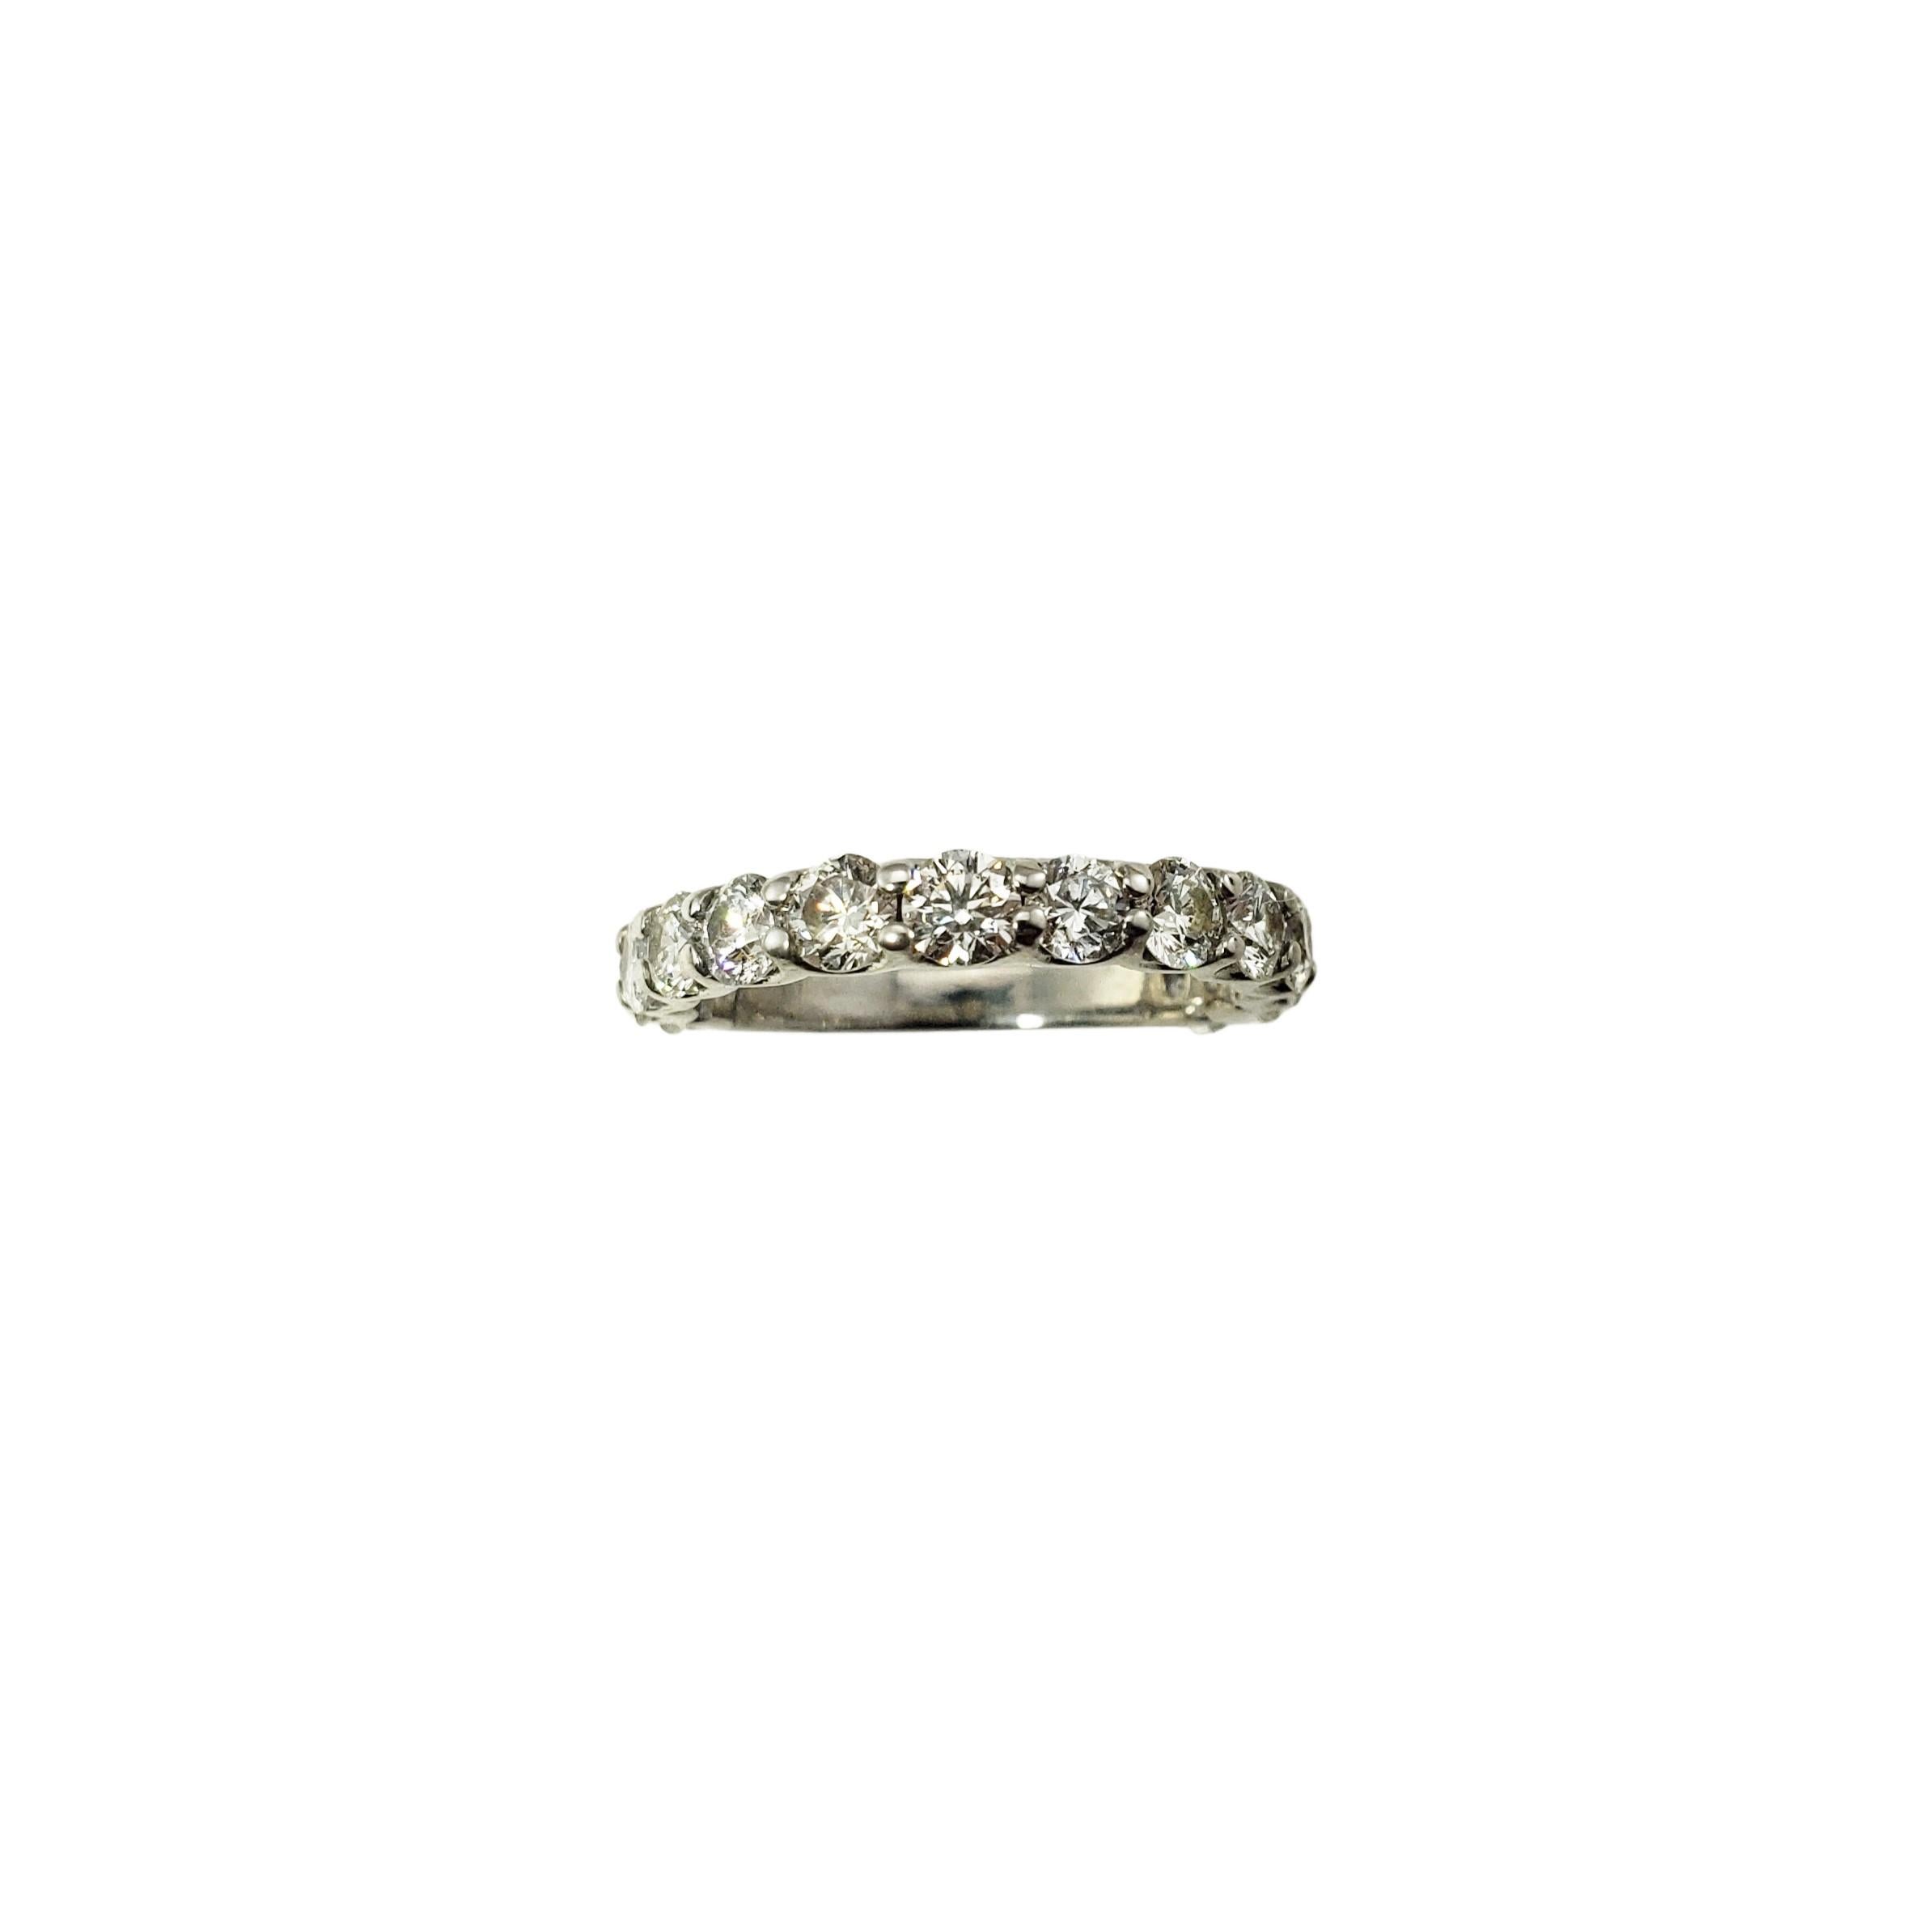 14 Karat White Gold Diamond Wedding Band Ring Size 6.5-

This sparkling band features 14 round brilliant cut diamonds set in classic 14K white gold.  Width:  3.5 mm.  Shank:  2 mm.

Approximate total diamond weight:  1.64 ct.

Diamond color: